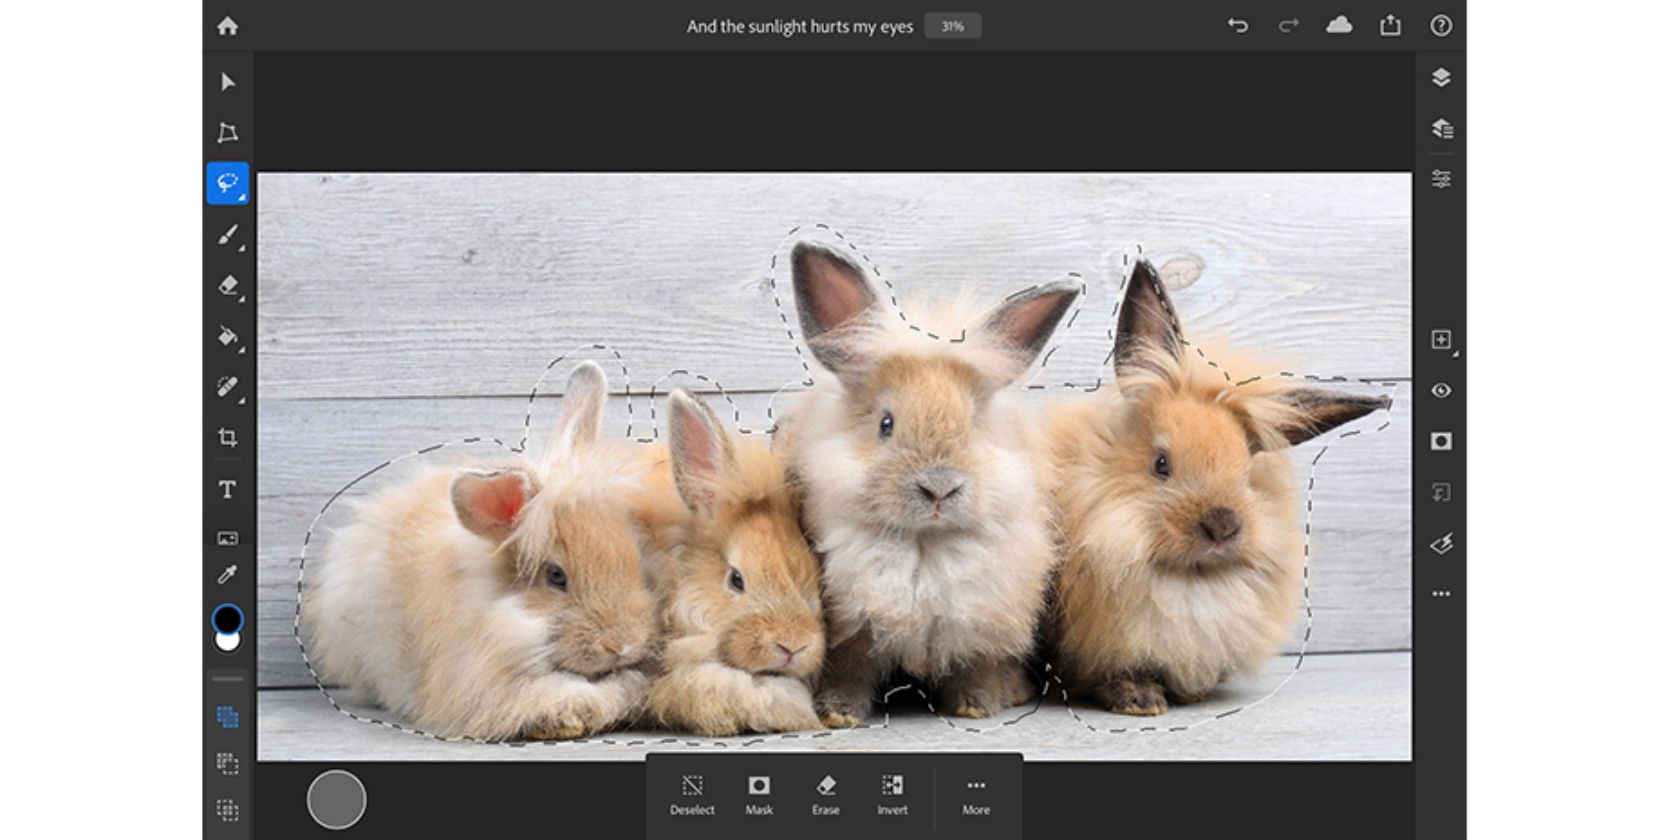 Adobe Updates Photoshop on iPad With Two New Features